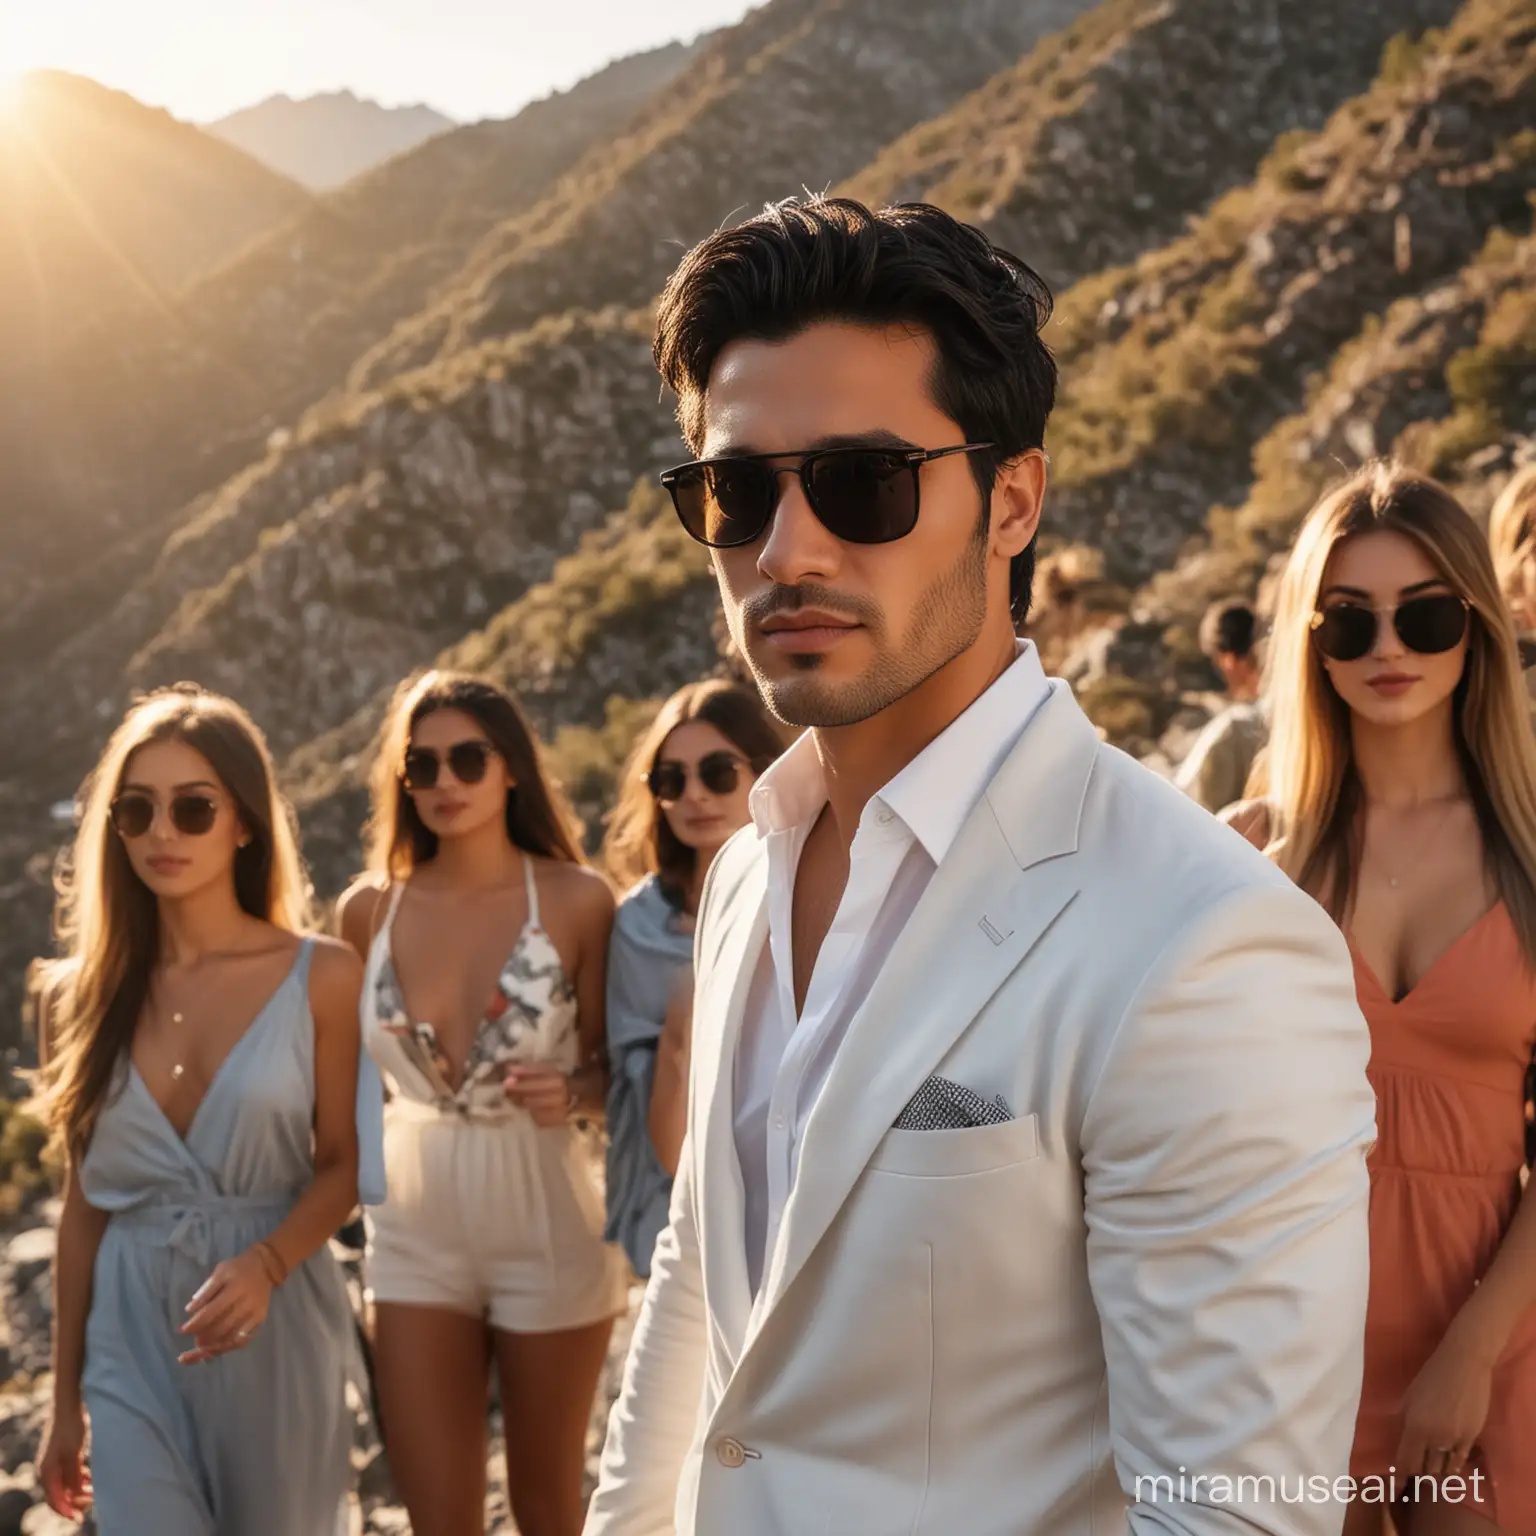 Wealthy Man with Stubble Enjoying Sunset with Friends in Mountain Range